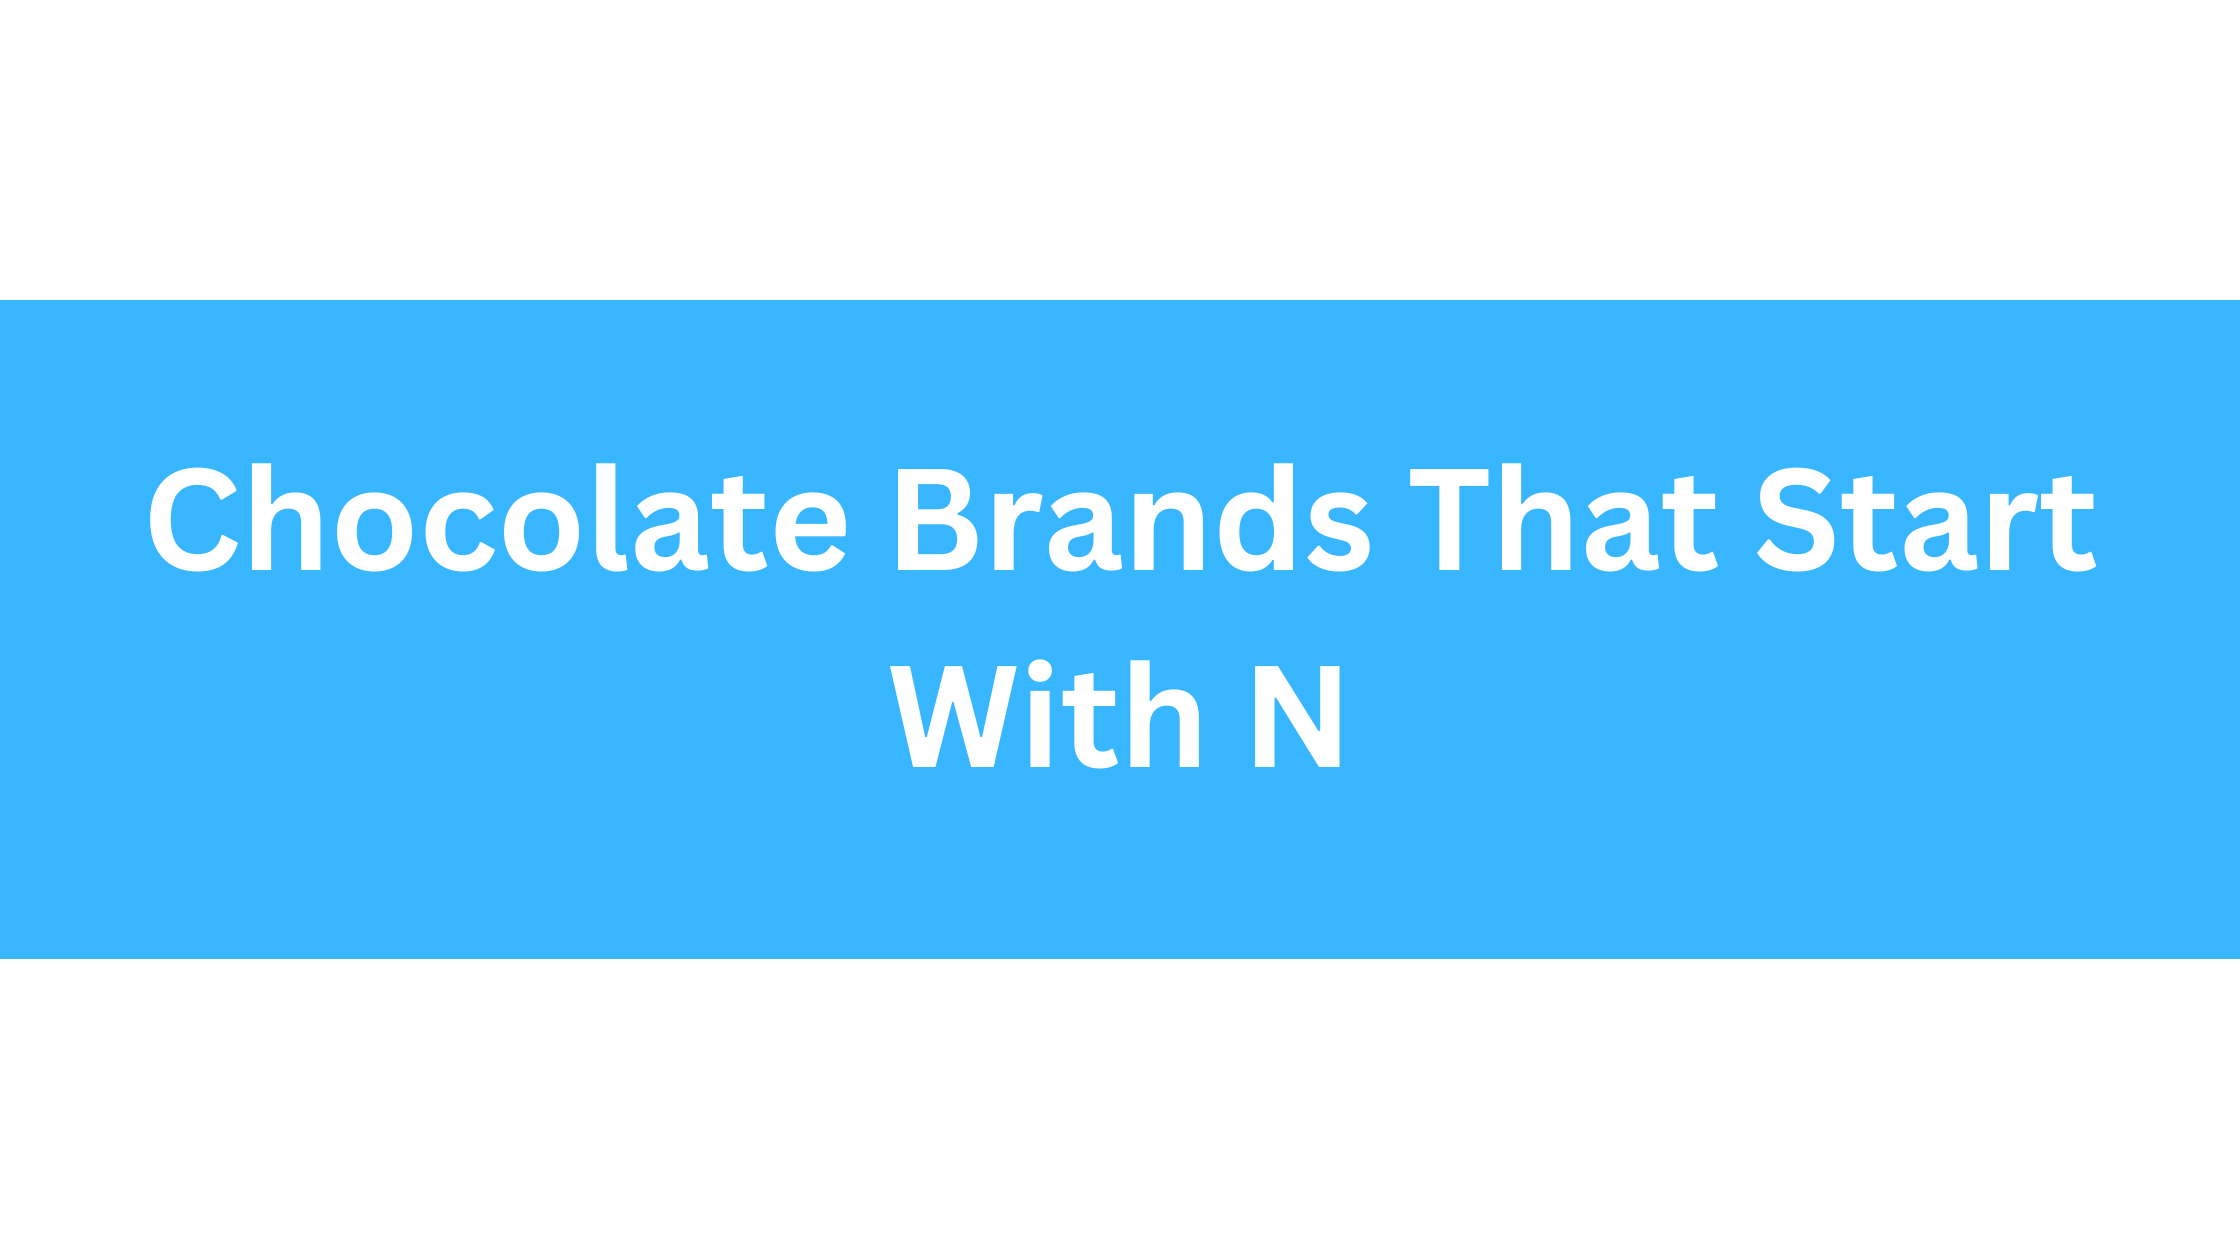 Chocolate Brands That Start With N